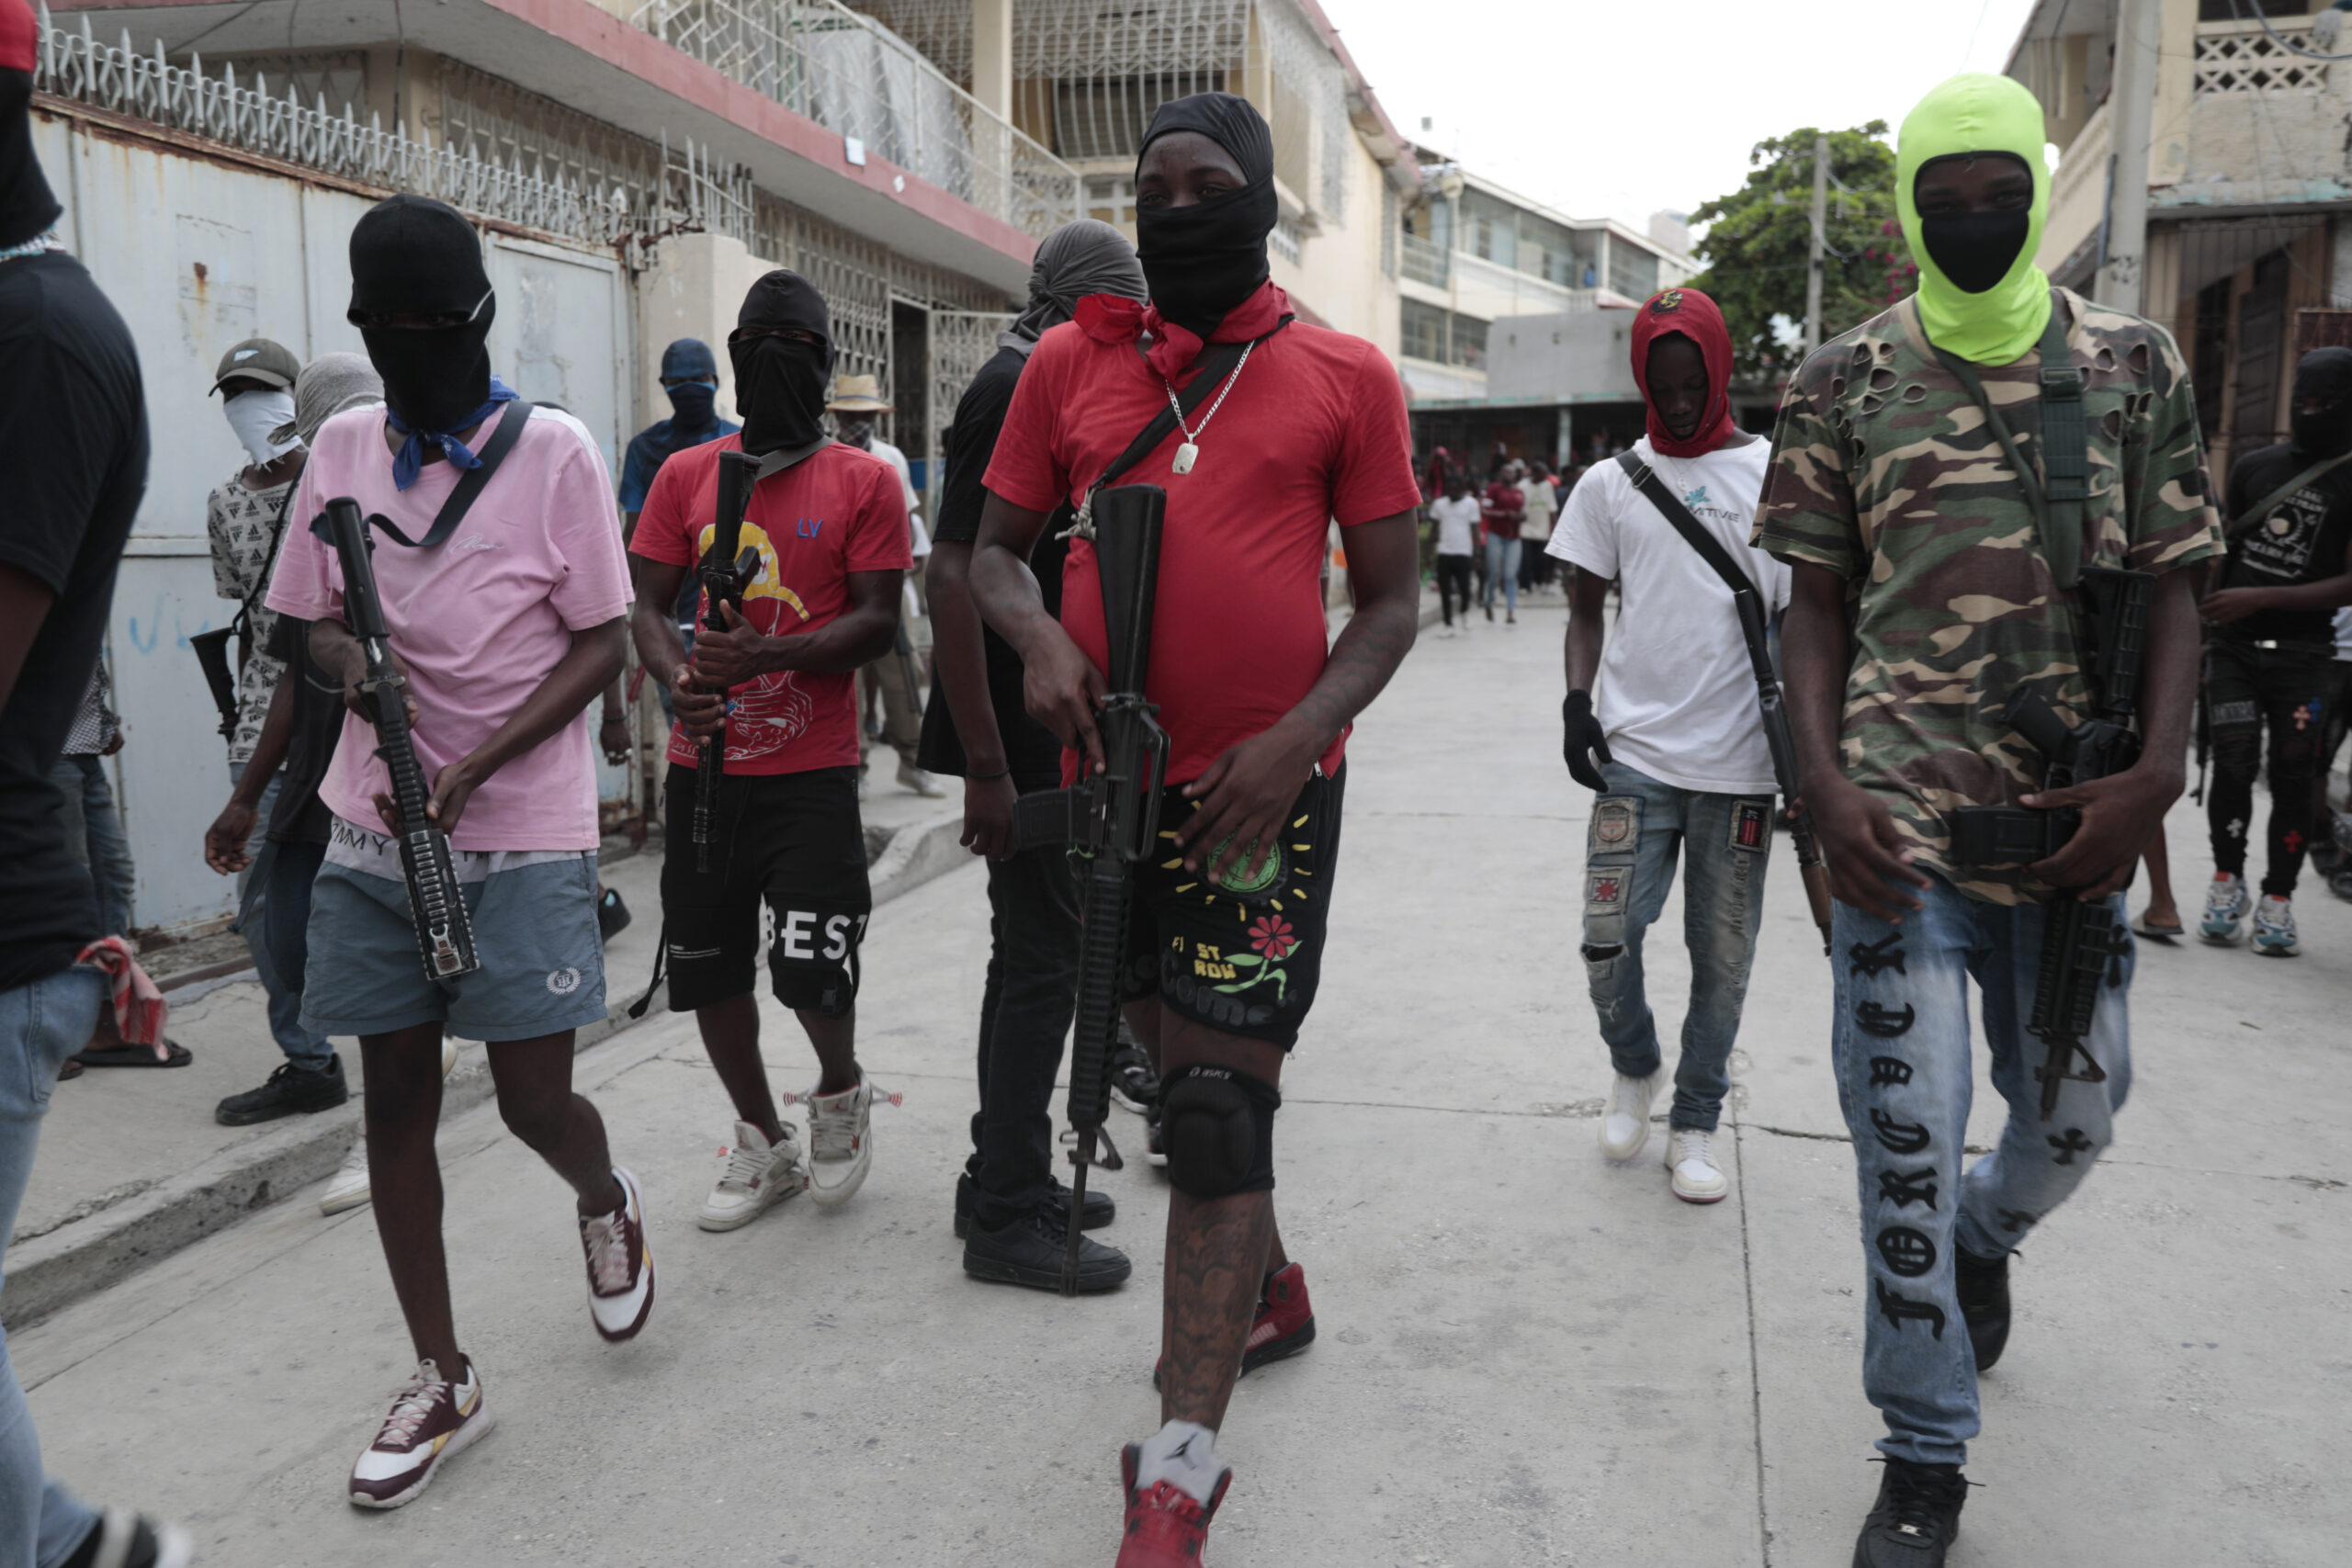 Armed members of "G9 and Family" march in a protest against Haitian Prime Minister Ariel Henry in Port-au-Prince, Haiti, Tuesday, Sept. 19, 2023. Photo credit: Odelyn Joseph